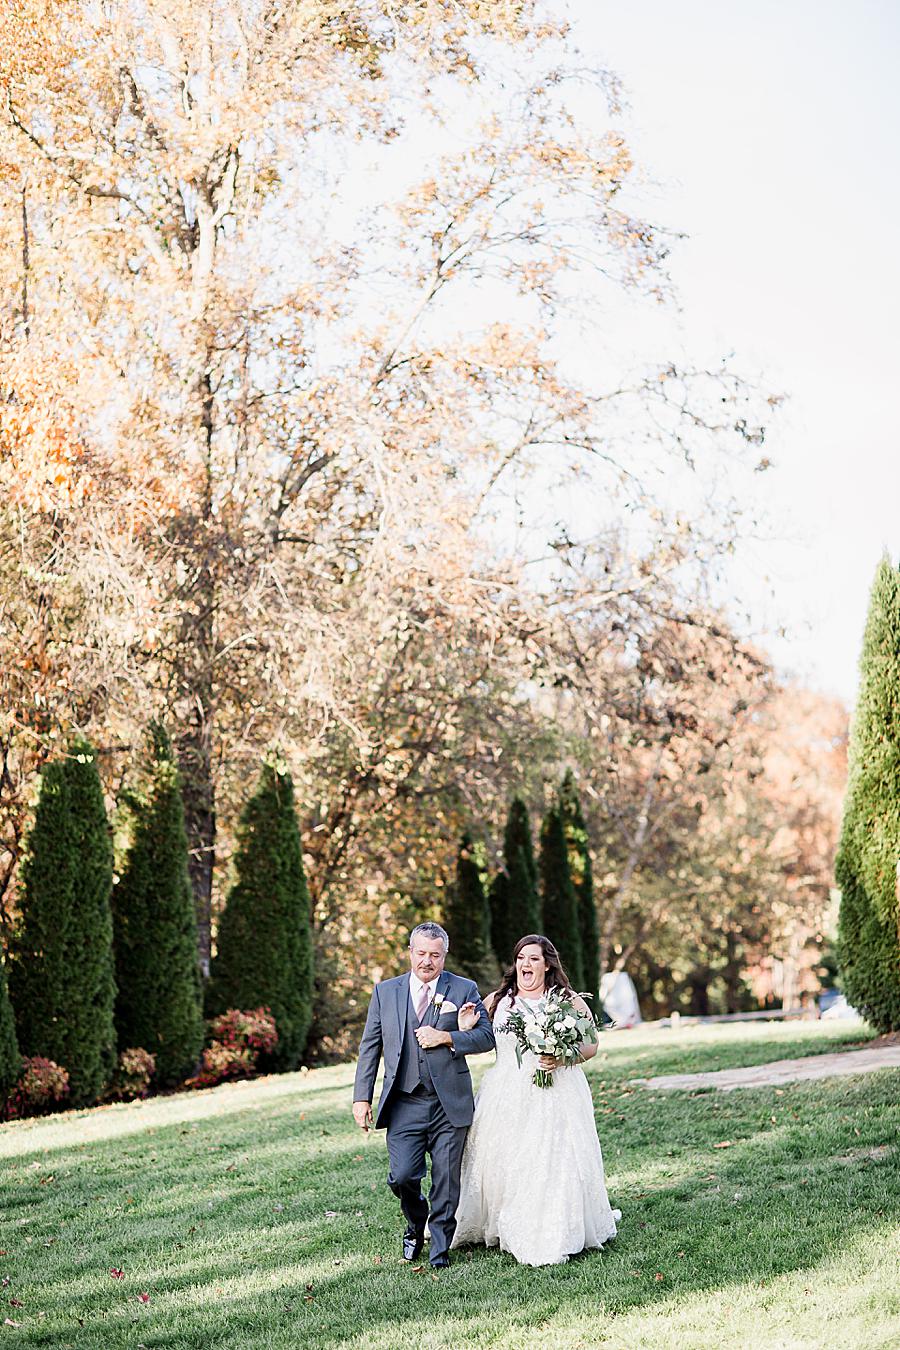 Walking down the aisle at this Wedding at Castleton Farms by Knoxville Wedding Photographer, Amanda May Photos.